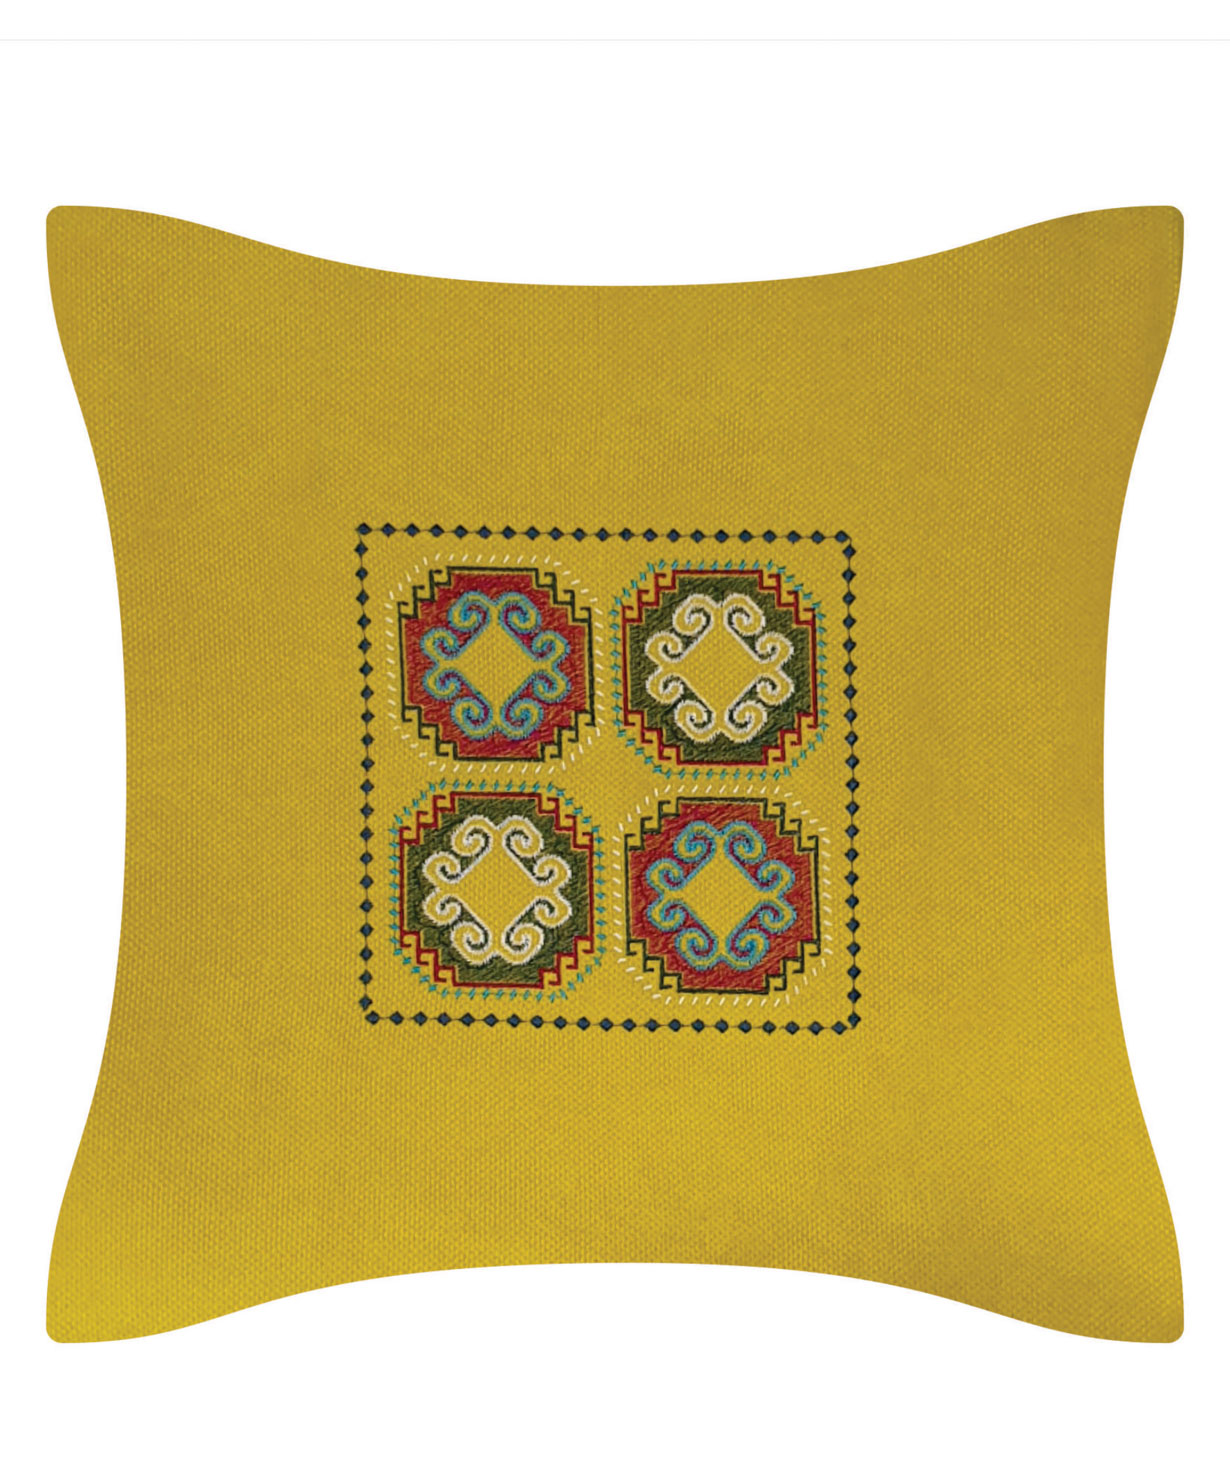 Pillow `Miskaryan heritage` embroidered with Armenian ornament №32